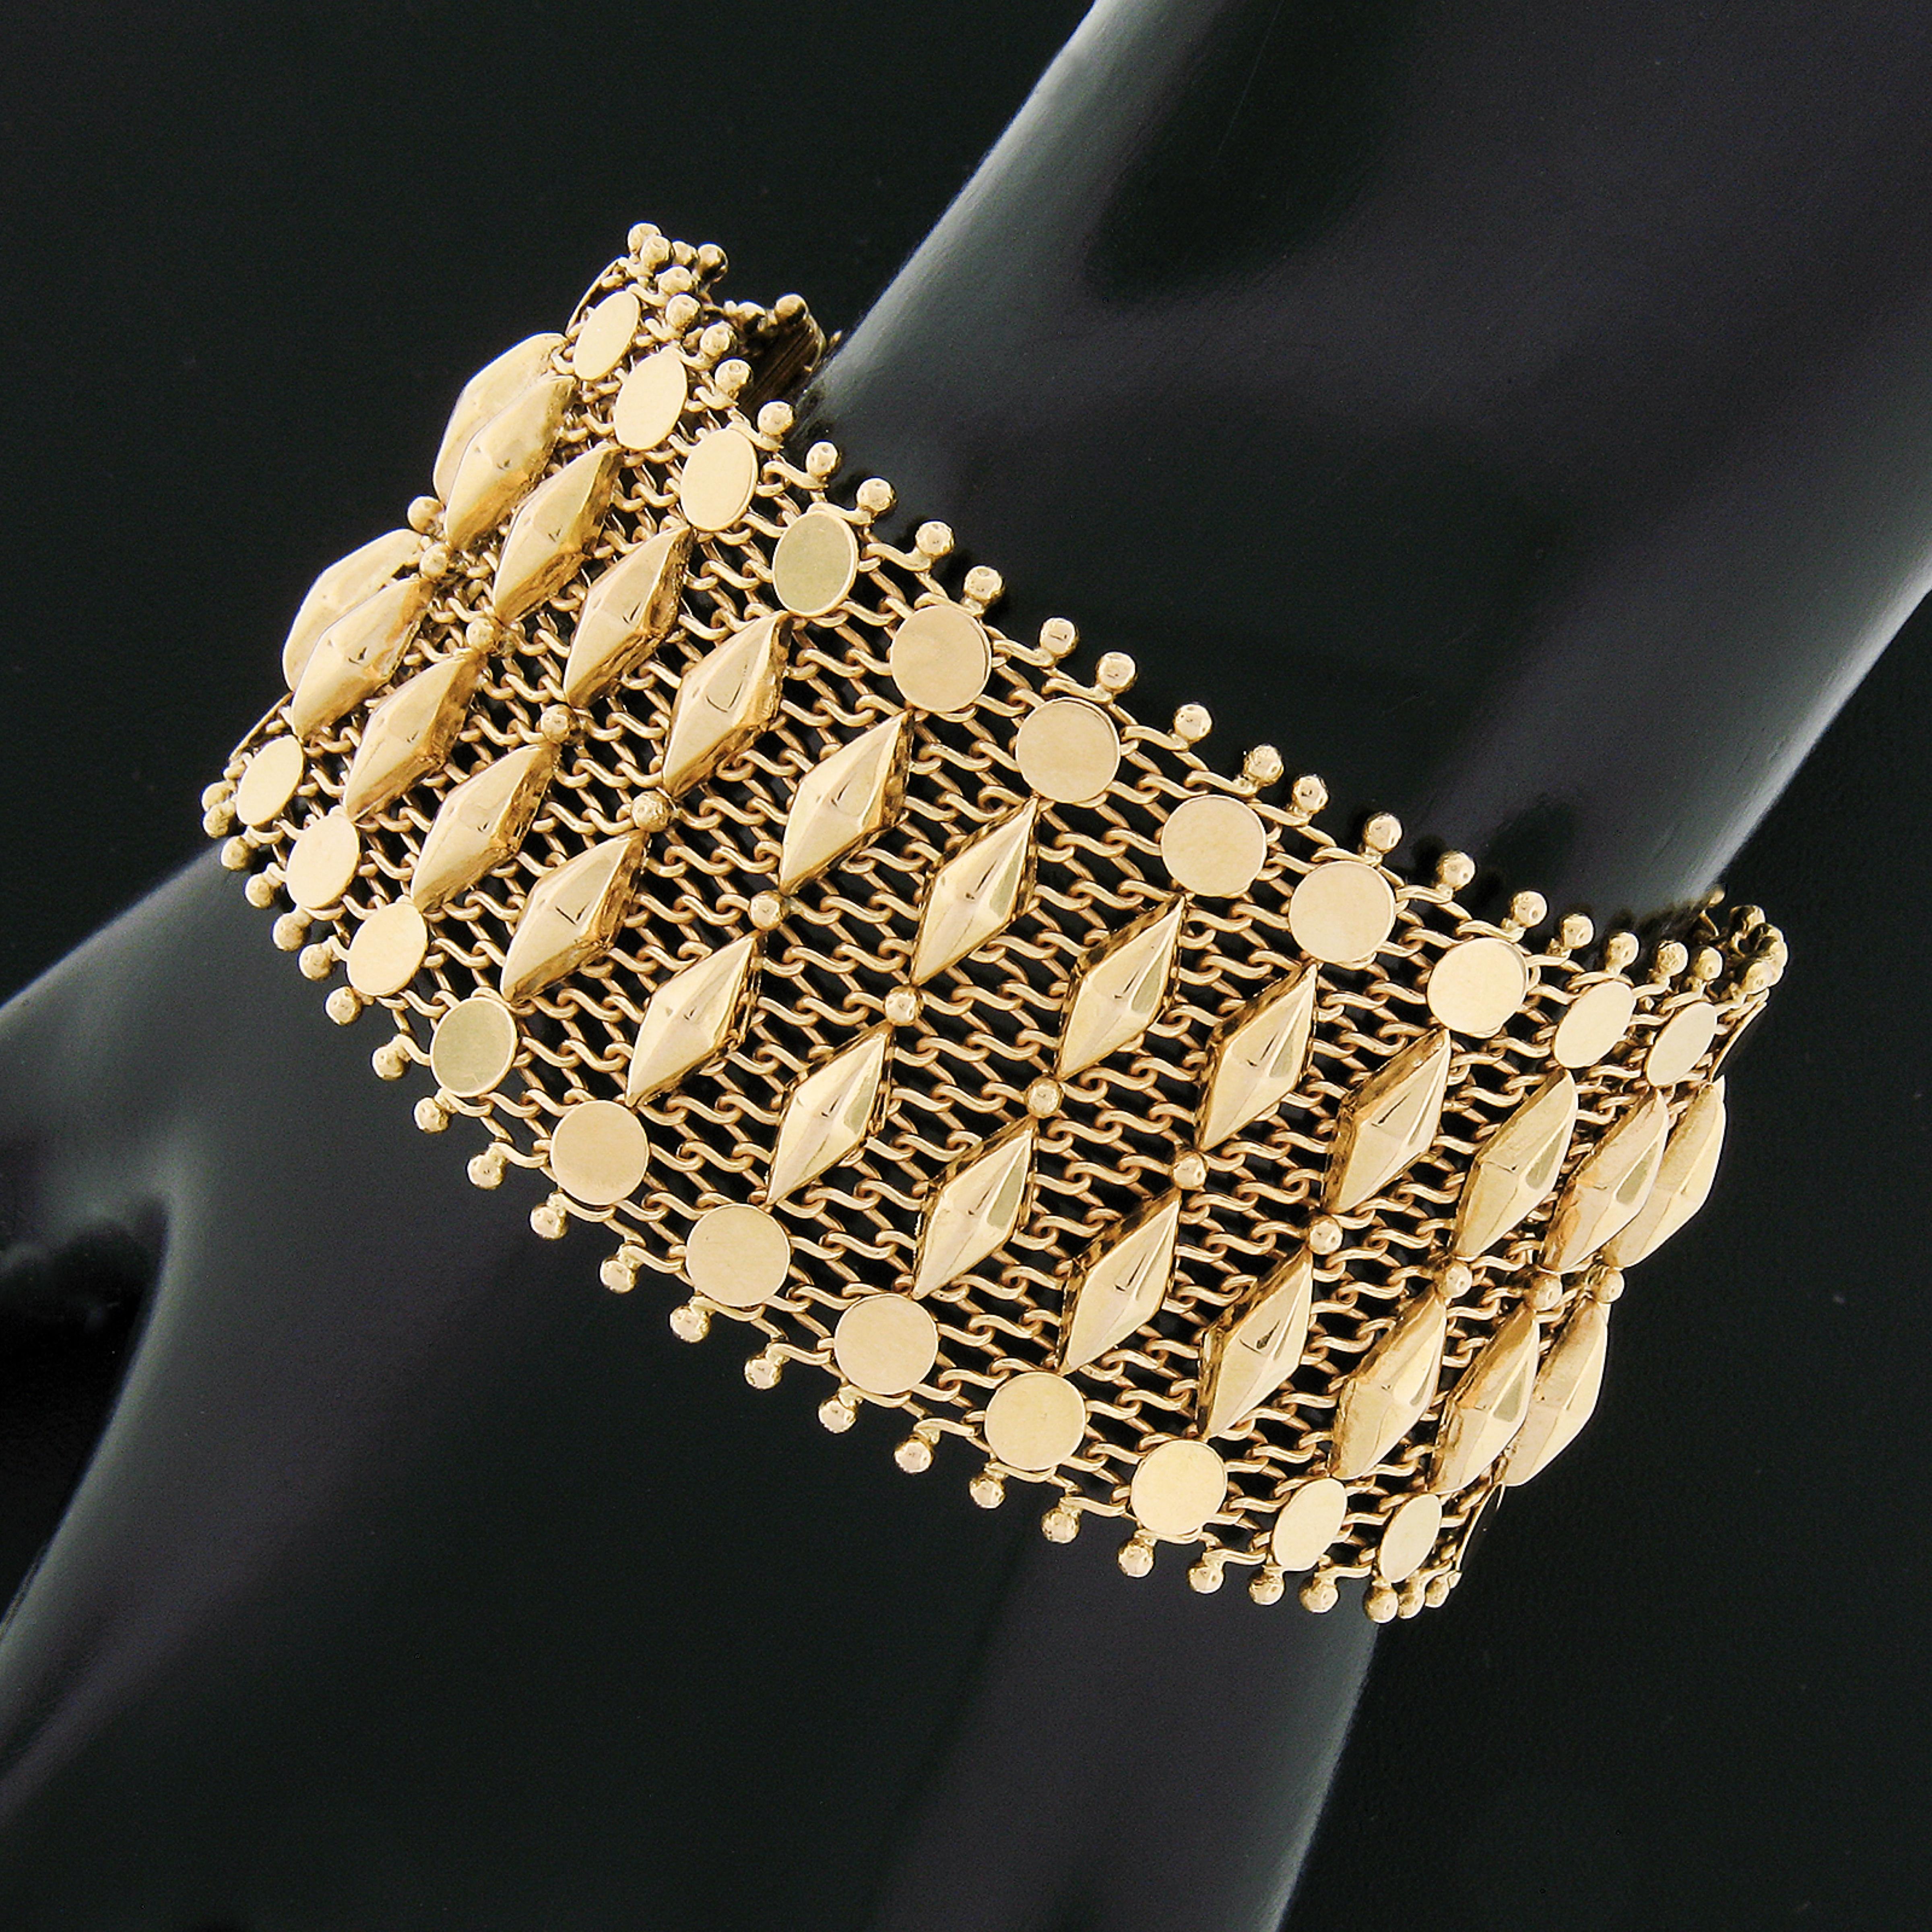 This truly elegant and unique vintage bracelet was crafted in solid 18k yellow gold and features approximately 1.3 inch wide mesh link that is silky smooth on the wrist. The bracelet is adorned with polished disks & faceted marquise shape designs